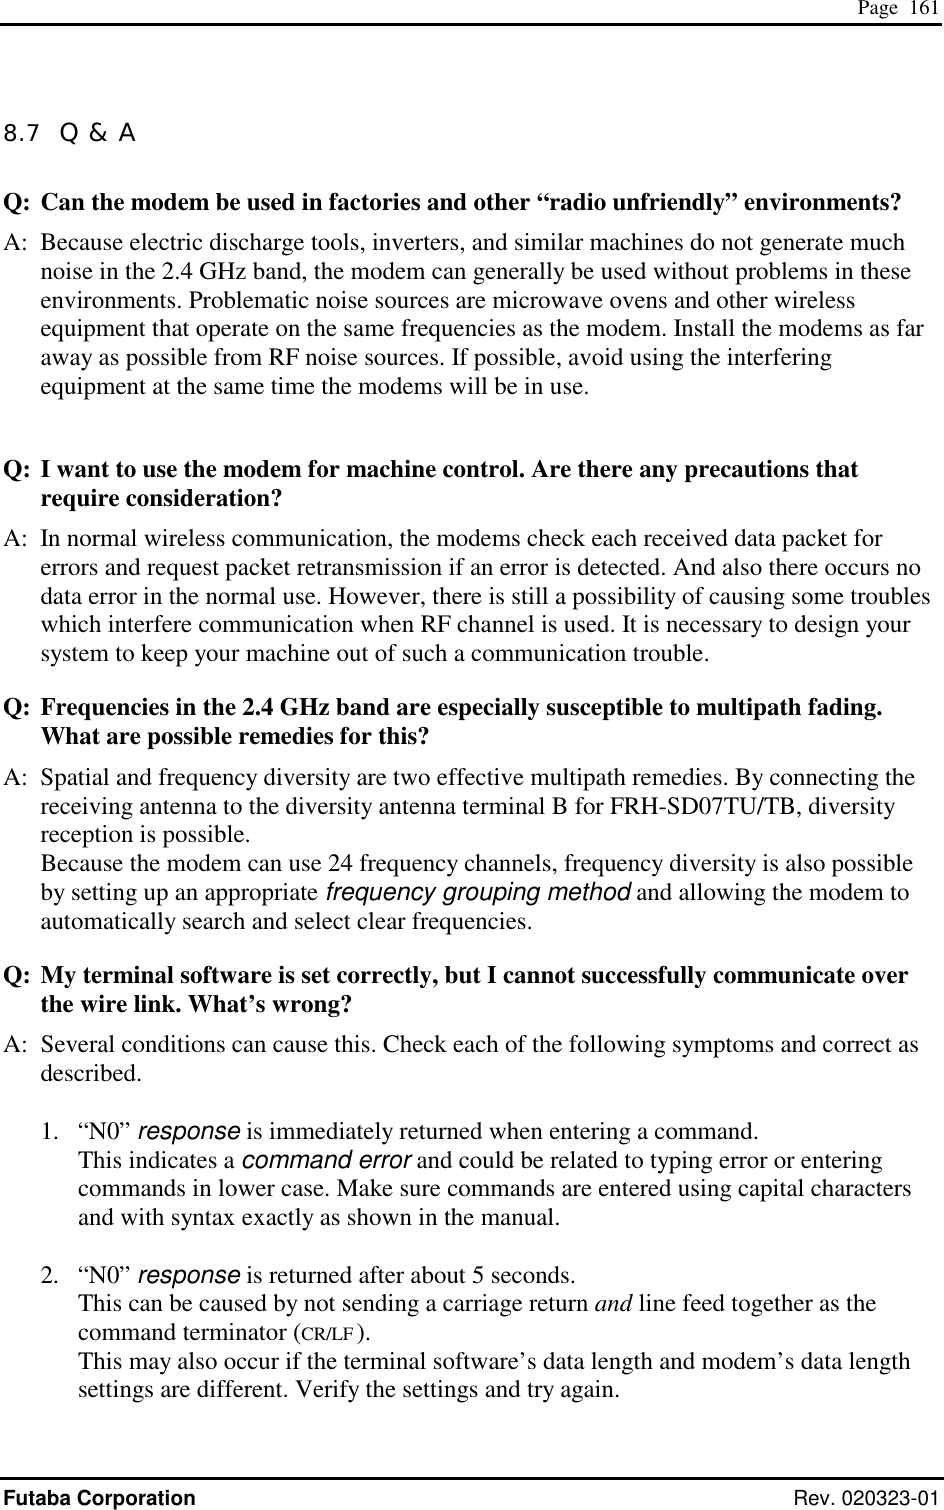  Page  161 Futaba Corporation Rev. 020323-01 8.7  Q &amp; A Q: Can the modem be used in factories and other “radio unfriendly” environments? A:  Because electric discharge tools, inverters, and similar machines do not generate much  noise in the 2.4 GHz band, the modem can generally be used without problems in these environments. Problematic noise sources are microwave ovens and other wireless equipment that operate on the same frequencies as the modem. Install the modems as far away as possible from RF noise sources. If possible, avoid using the interfering equipment at the same time the modems will be in use.  Q: I want to use the modem for machine control. Are there any precautions that require consideration? A:  In normal wireless communication, the modems check each received data packet for errors and request packet retransmission if an error is detected. And also there occurs no data error in the normal use. However, there is still a possibility of causing some troubles which interfere communication when RF channel is used. It is necessary to design your system to keep your machine out of such a communication trouble.   Q: Frequencies in the 2.4 GHz band are especially susceptible to multipath fading. What are possible remedies for this? A:  Spatial and frequency diversity are two effective multipath remedies. By connecting the receiving antenna to the diversity antenna terminal B for FRH-SD07TU/TB, diversity reception is possible. Because the modem can use 24 frequency channels, frequency diversity is also possible by setting up an appropriate frequency grouping method and allowing the modem to automatically search and select clear frequencies. Q: My terminal software is set correctly, but I cannot successfully communicate over the wire link. What’s wrong? A:  Several conditions can cause this. Check each of the following symptoms and correct as described.  1. “N0” response is immediately returned when entering a command. This indicates a command error and could be related to typing error or entering commands in lower case. Make sure commands are entered using capital characters and with syntax exactly as shown in the manual.  2. “N0” response is returned after about 5 seconds. This can be caused by not sending a carriage return and line feed together as the command terminator (CR/LF ).    This may also occur if the terminal software’s data length and modem’s data length settings are different. Verify the settings and try again.  